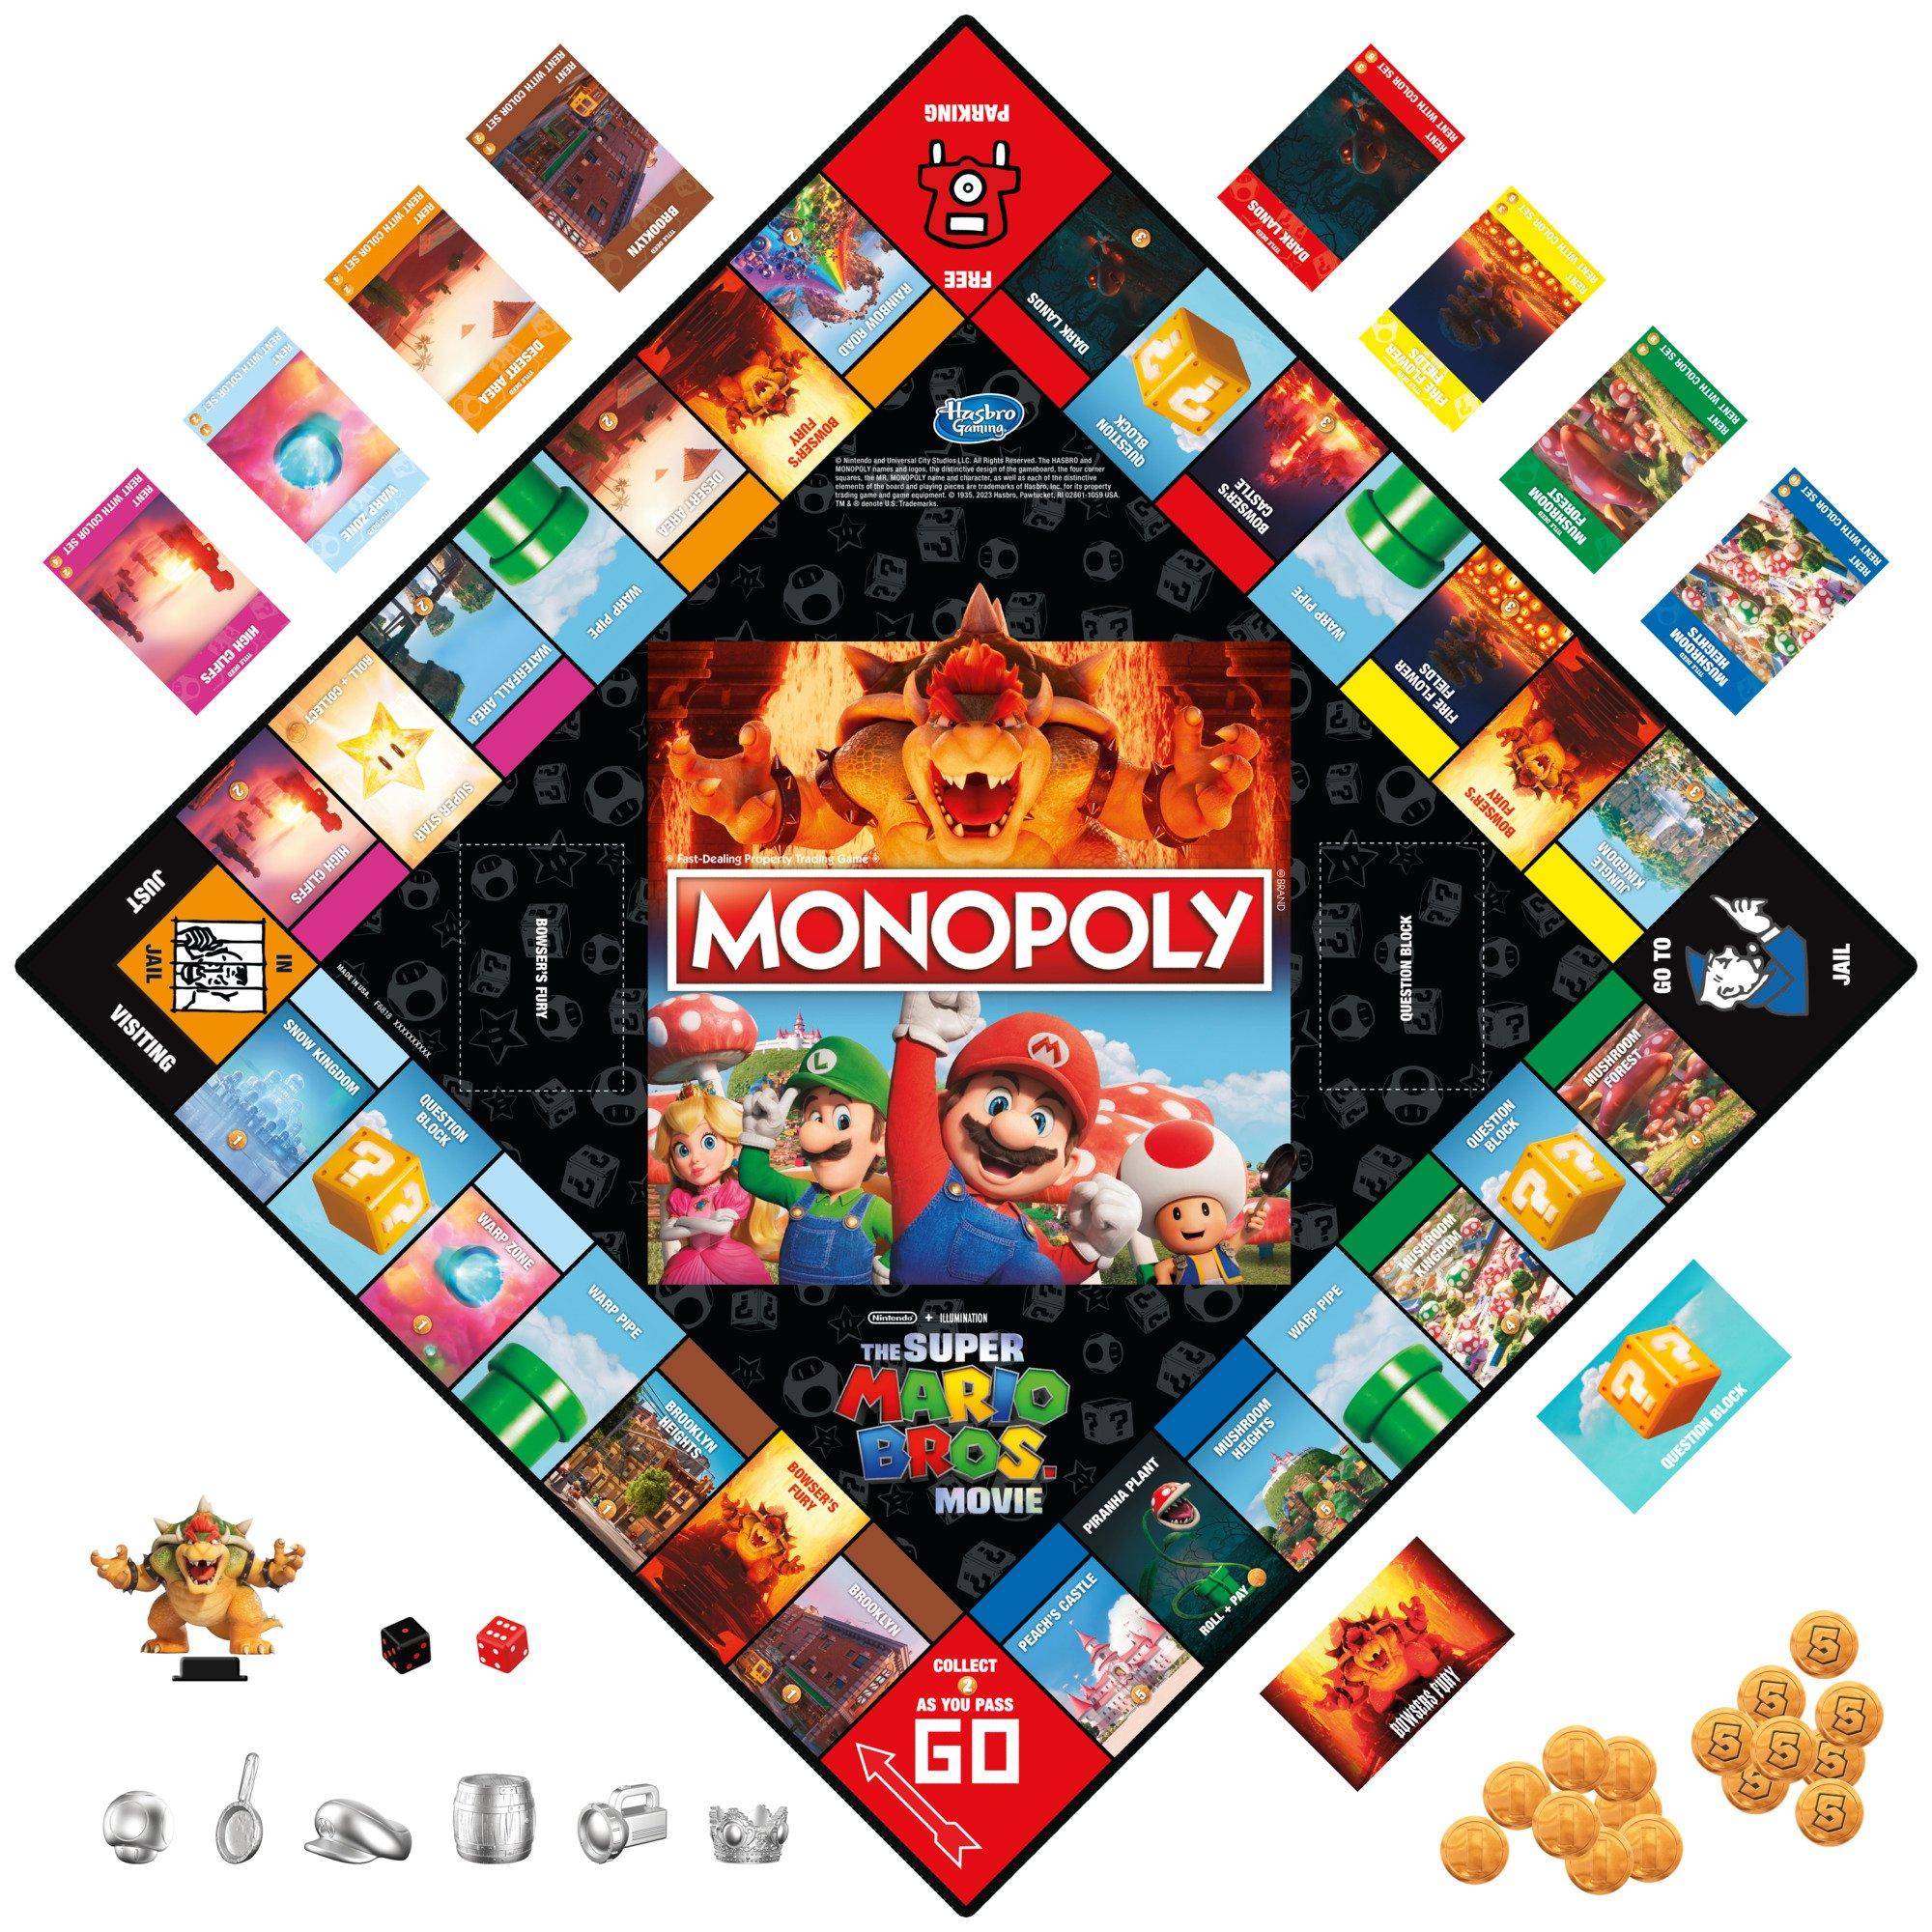 Monopoly board game • Compare & find best price now »